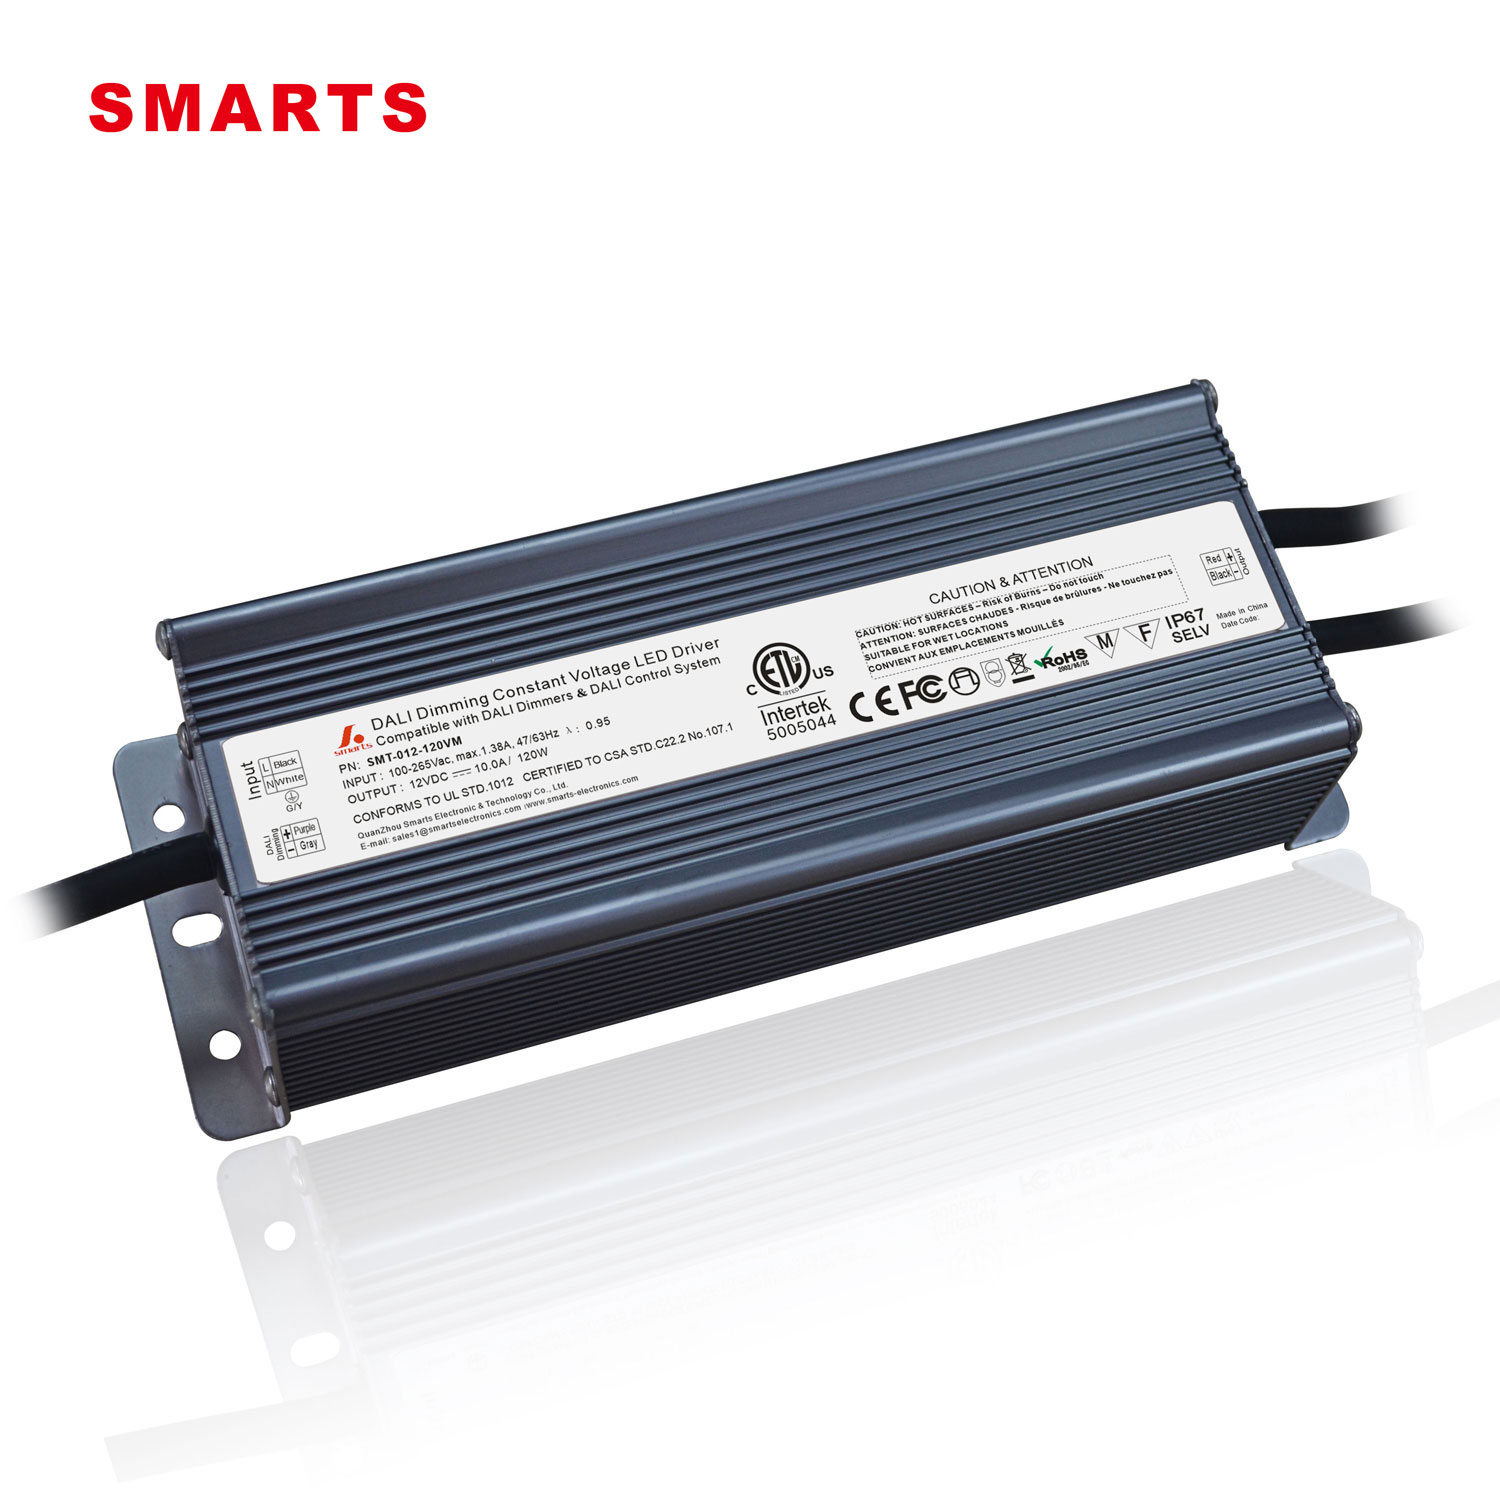 120w dali dimmable led driver